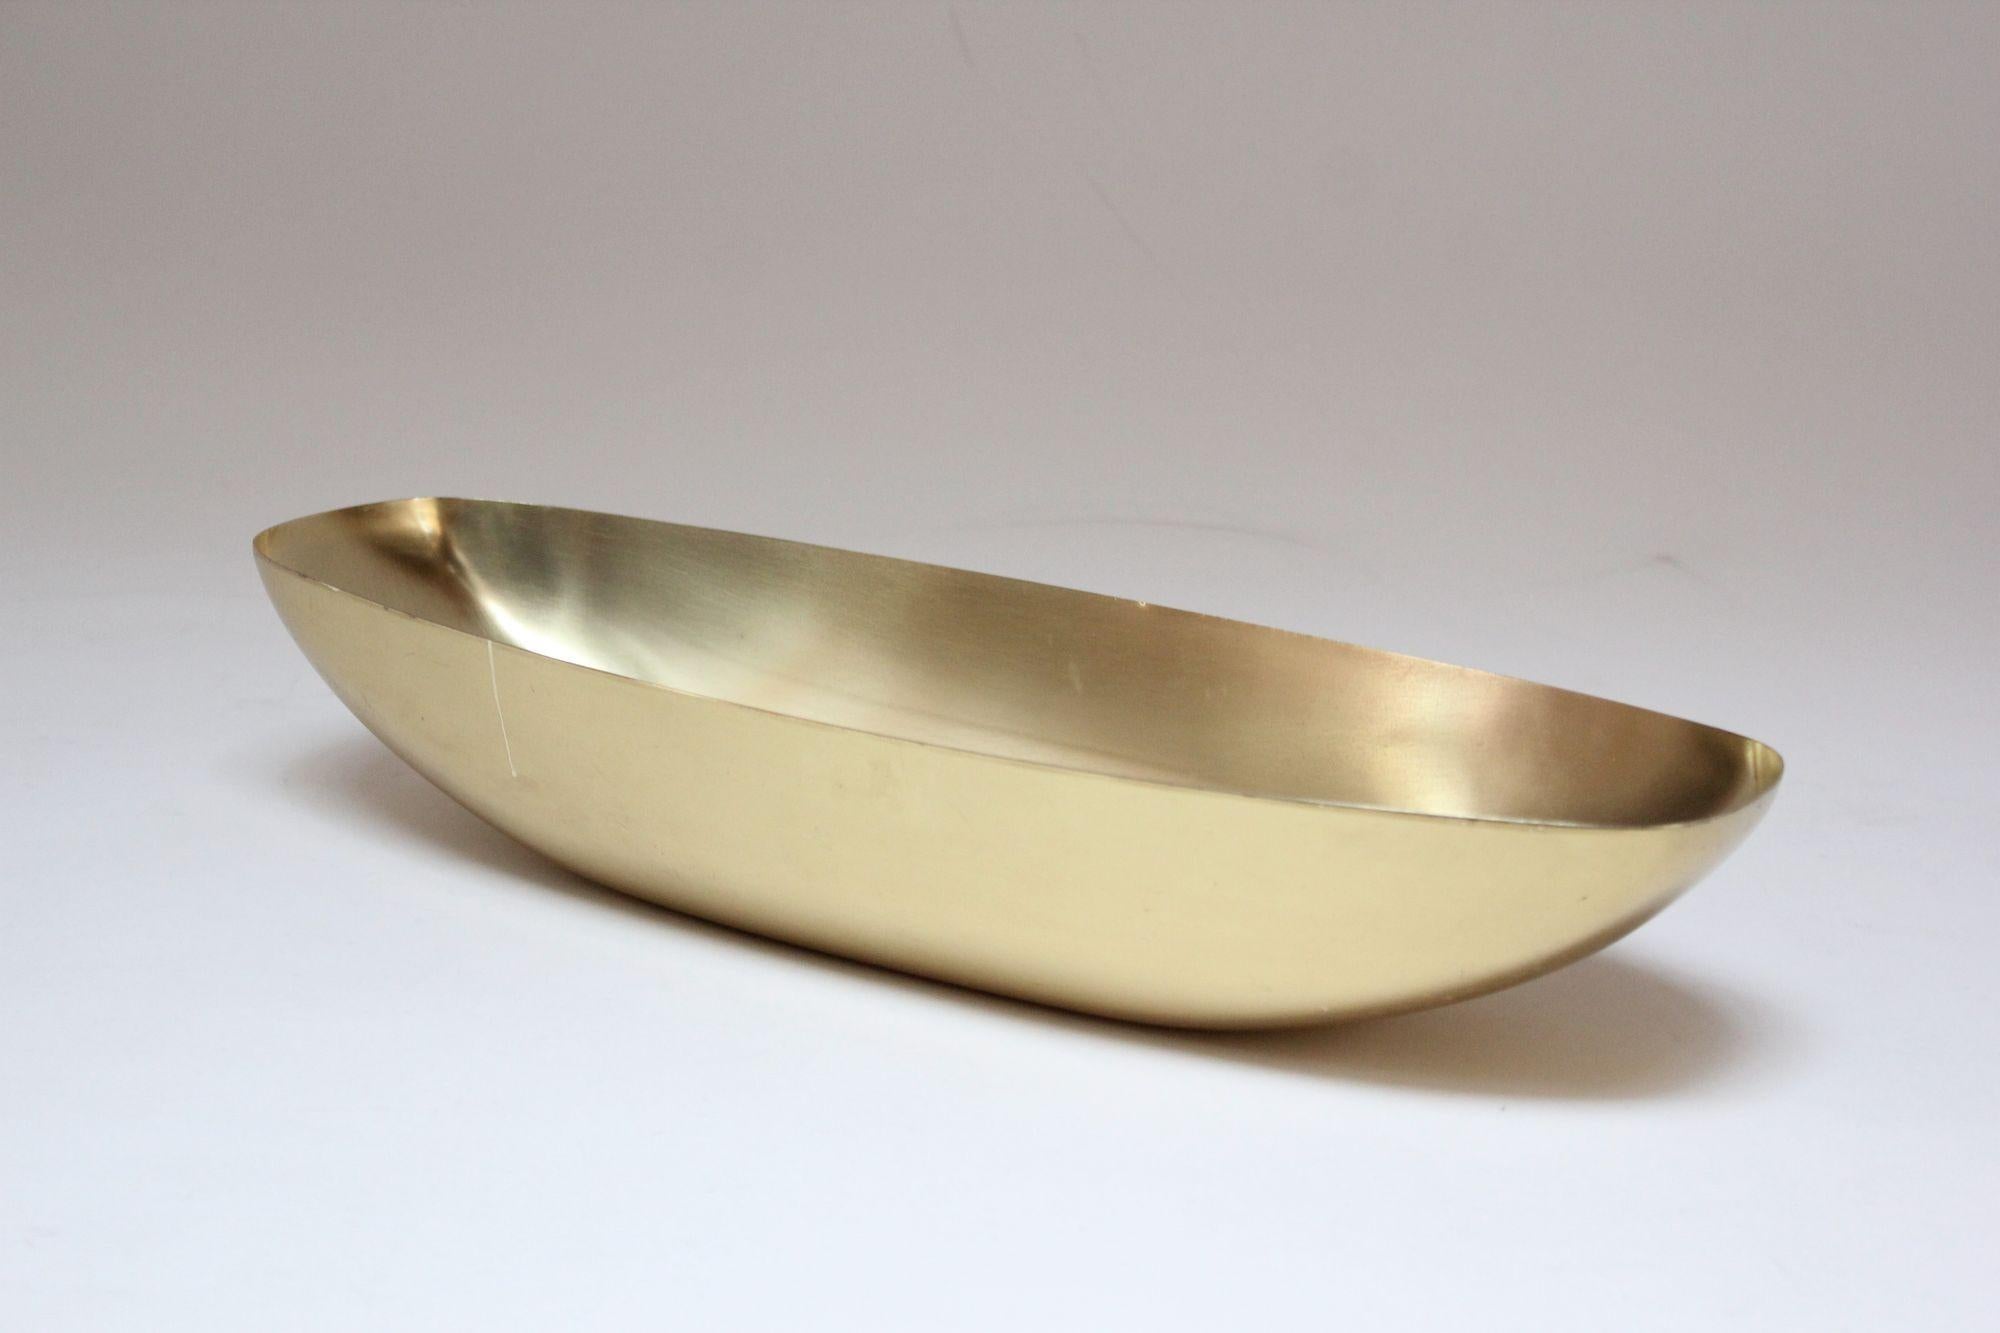 Vintage Hollywood Regency-style oblong brass serving/decorative bowl (ca 1970s, USA).
Newly polished condition - interior glistens, showing only a smattering of small tarnish spots, while exterior shows light patina/wear consistent with age/use. The